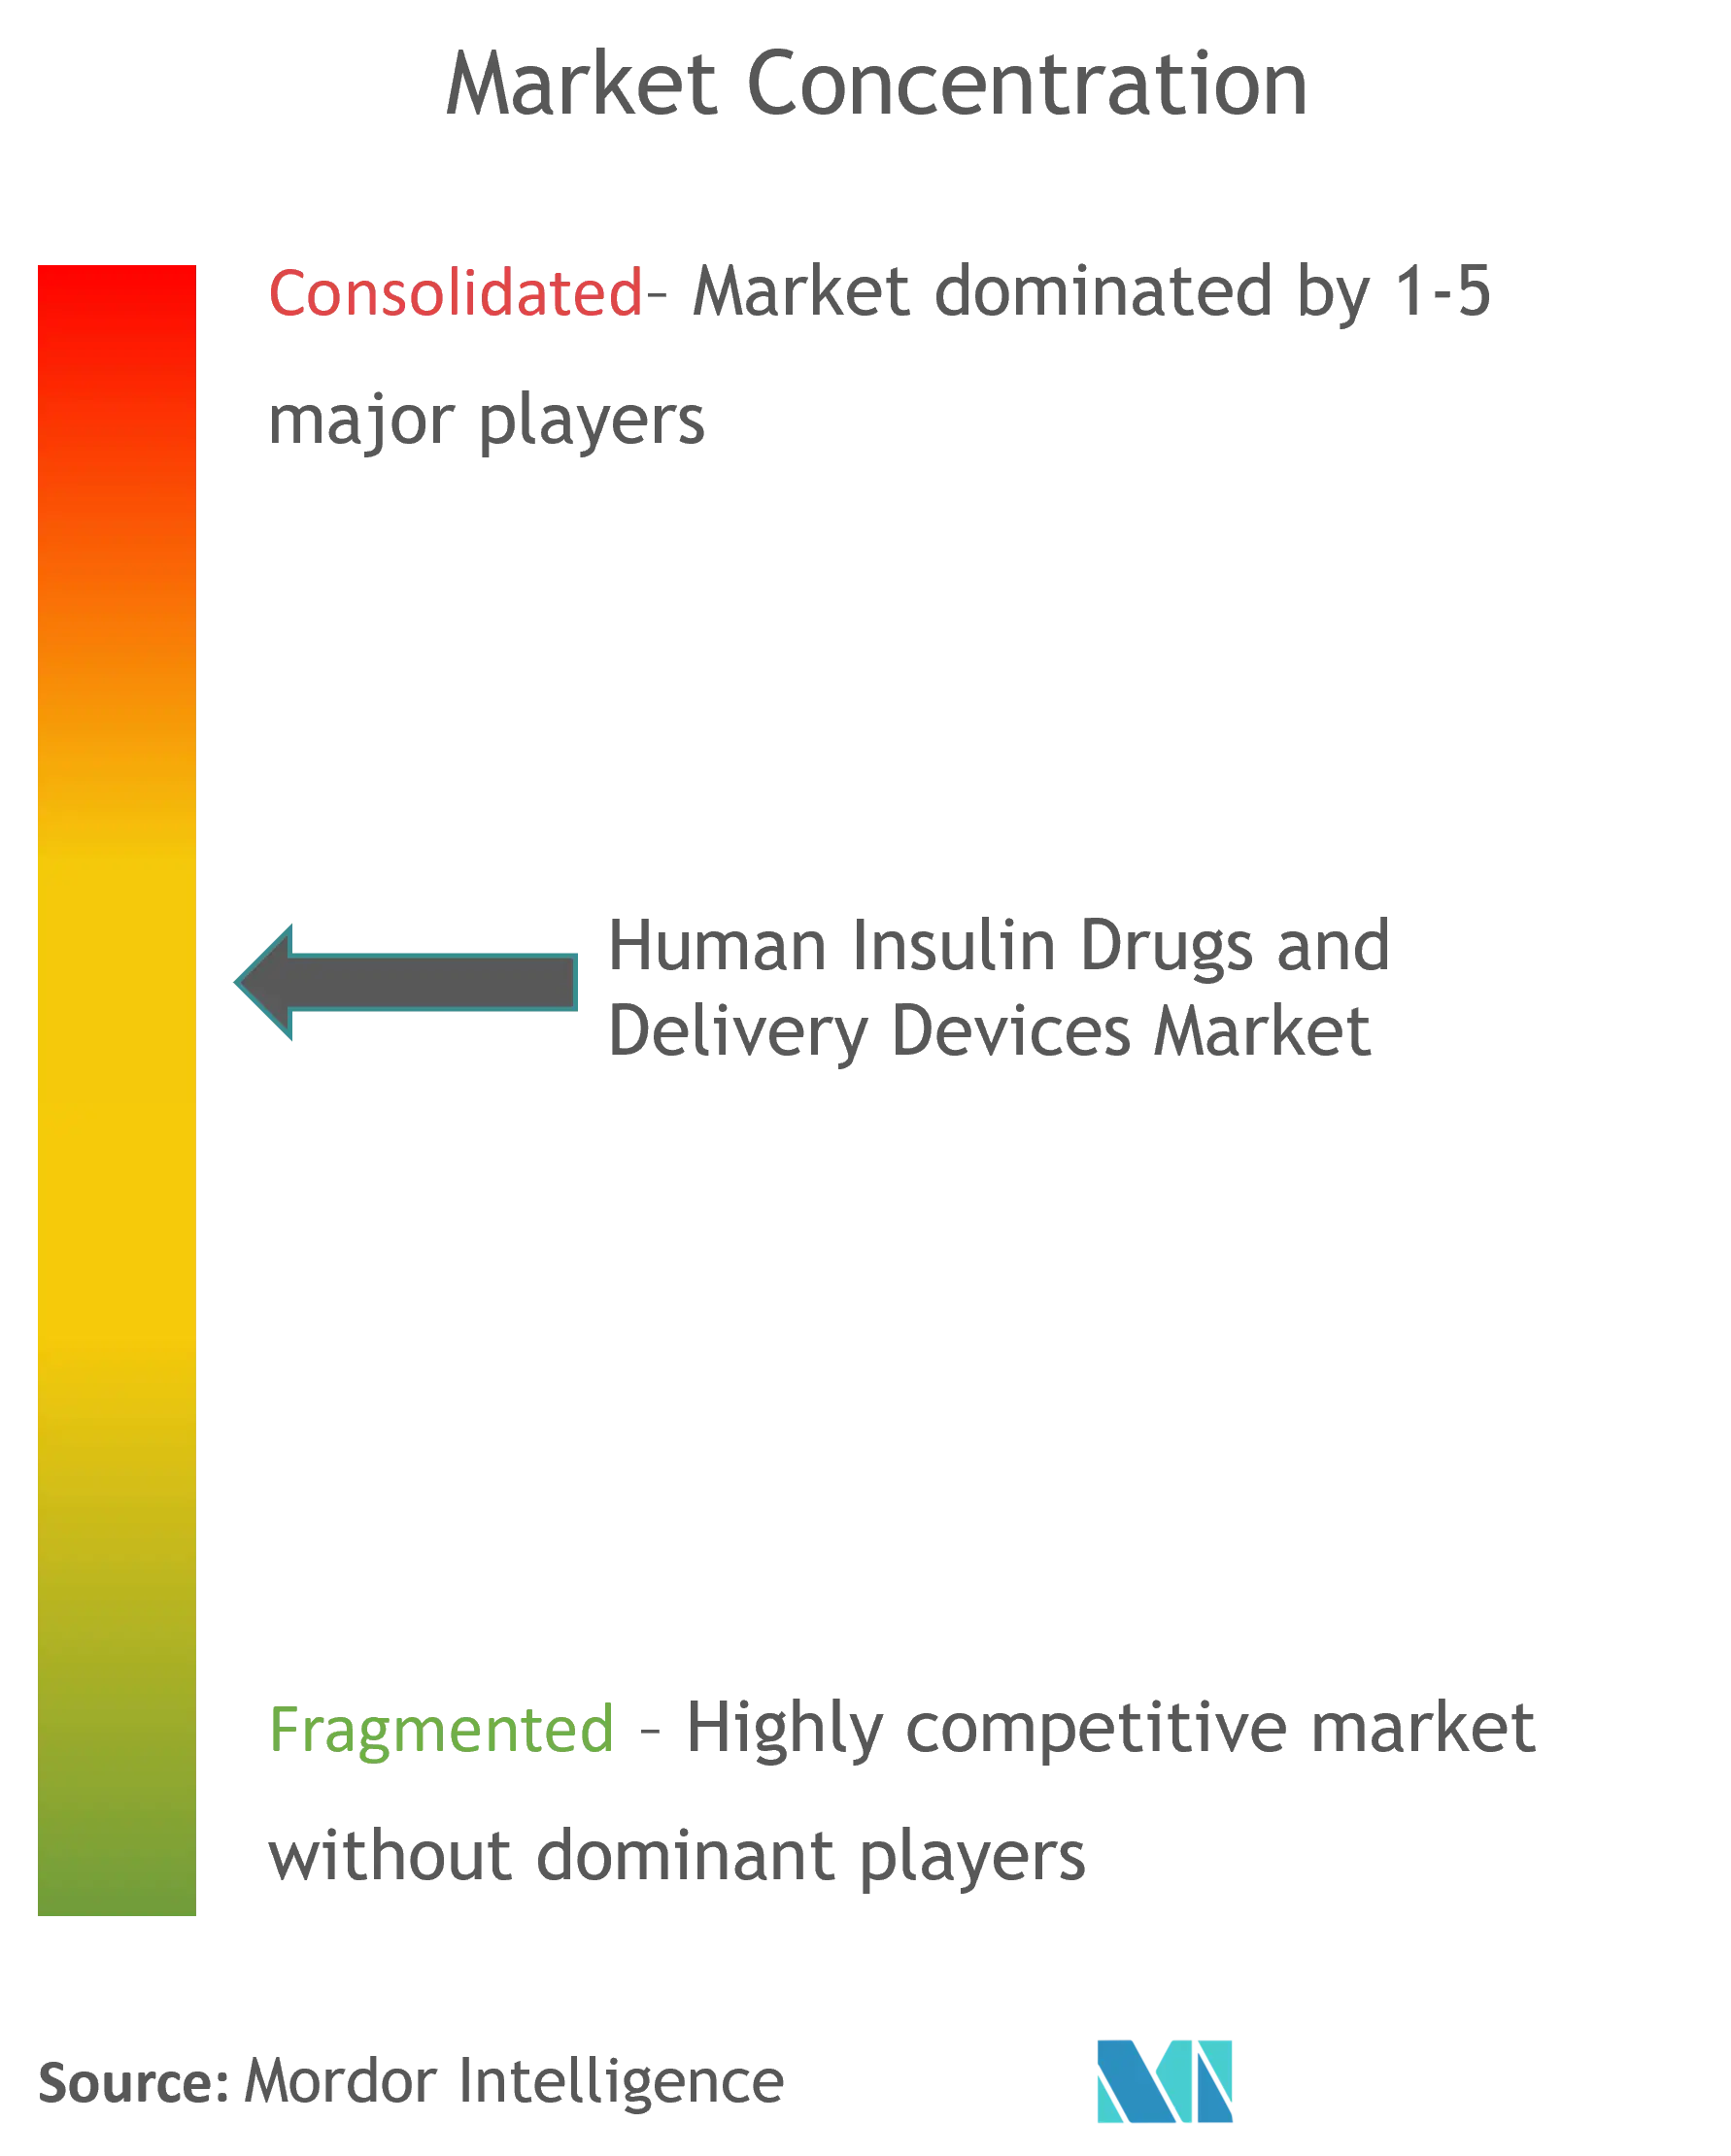 Human Insulin Drugs And Delivery Devices Market Concentration